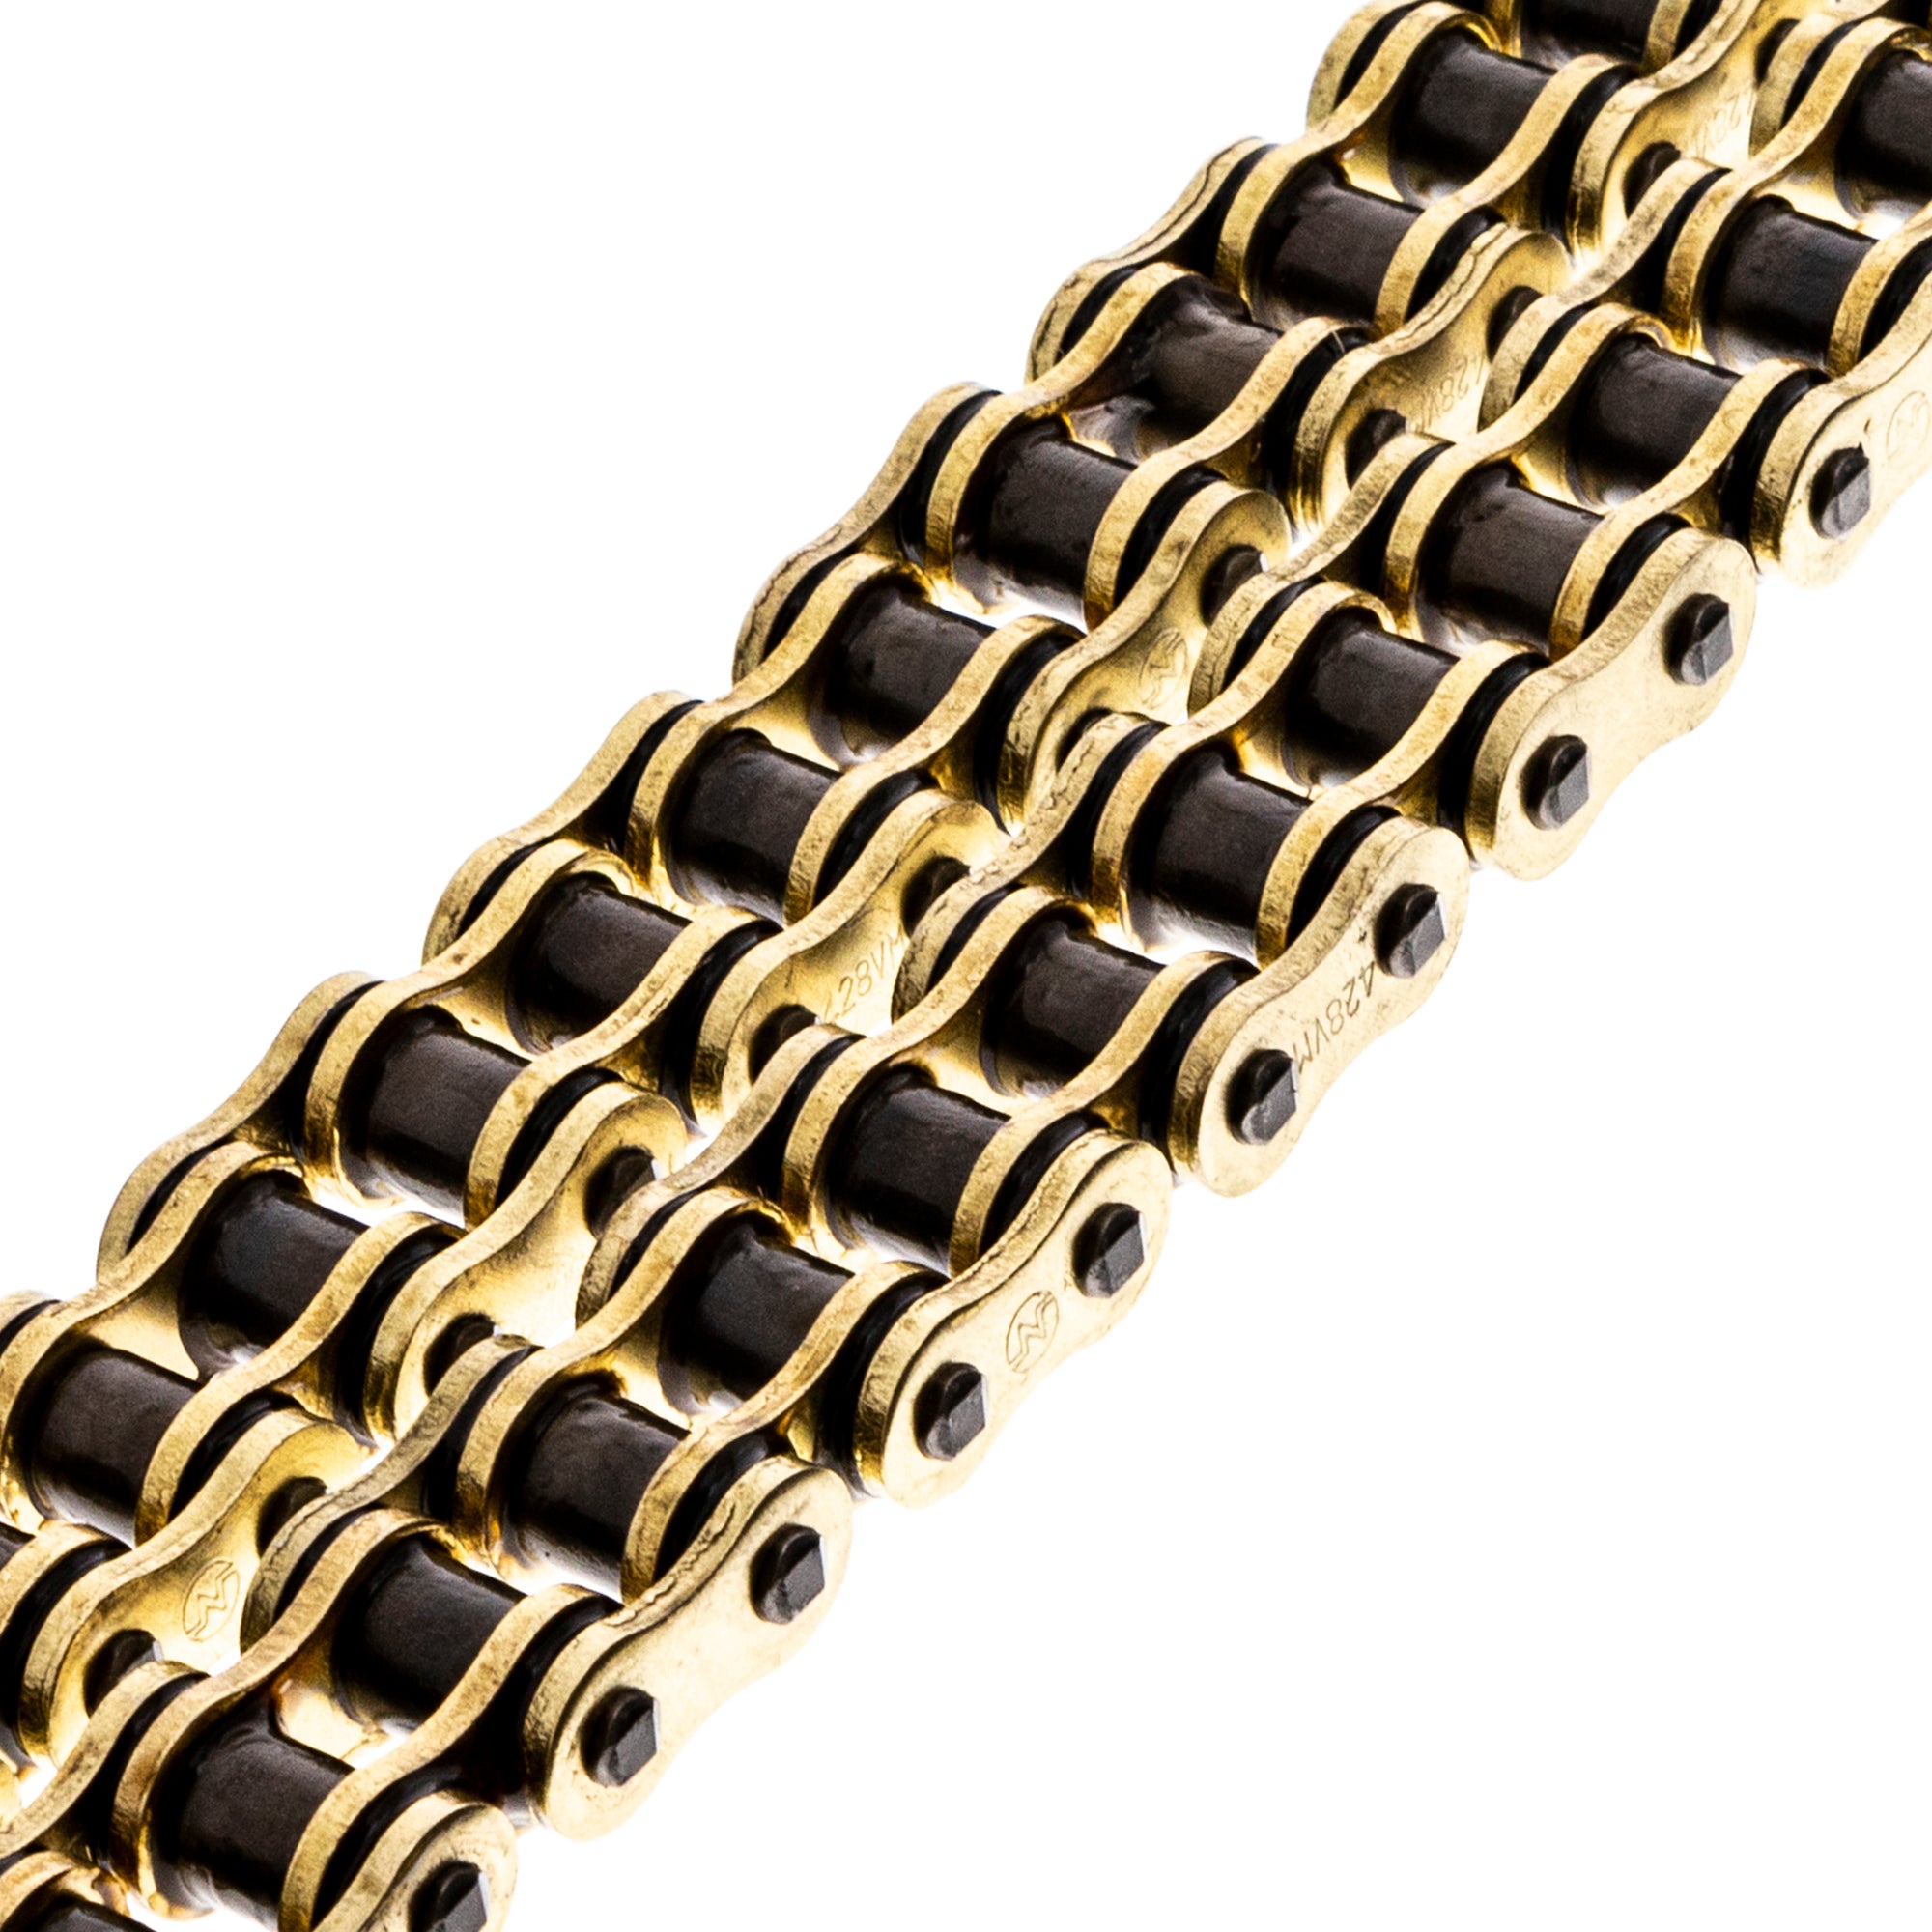 Gold X-Ring Chain 136 w/ Master Link for zOTHER Senda RS4 RM80 5482 NICHE 519-CDC2593H